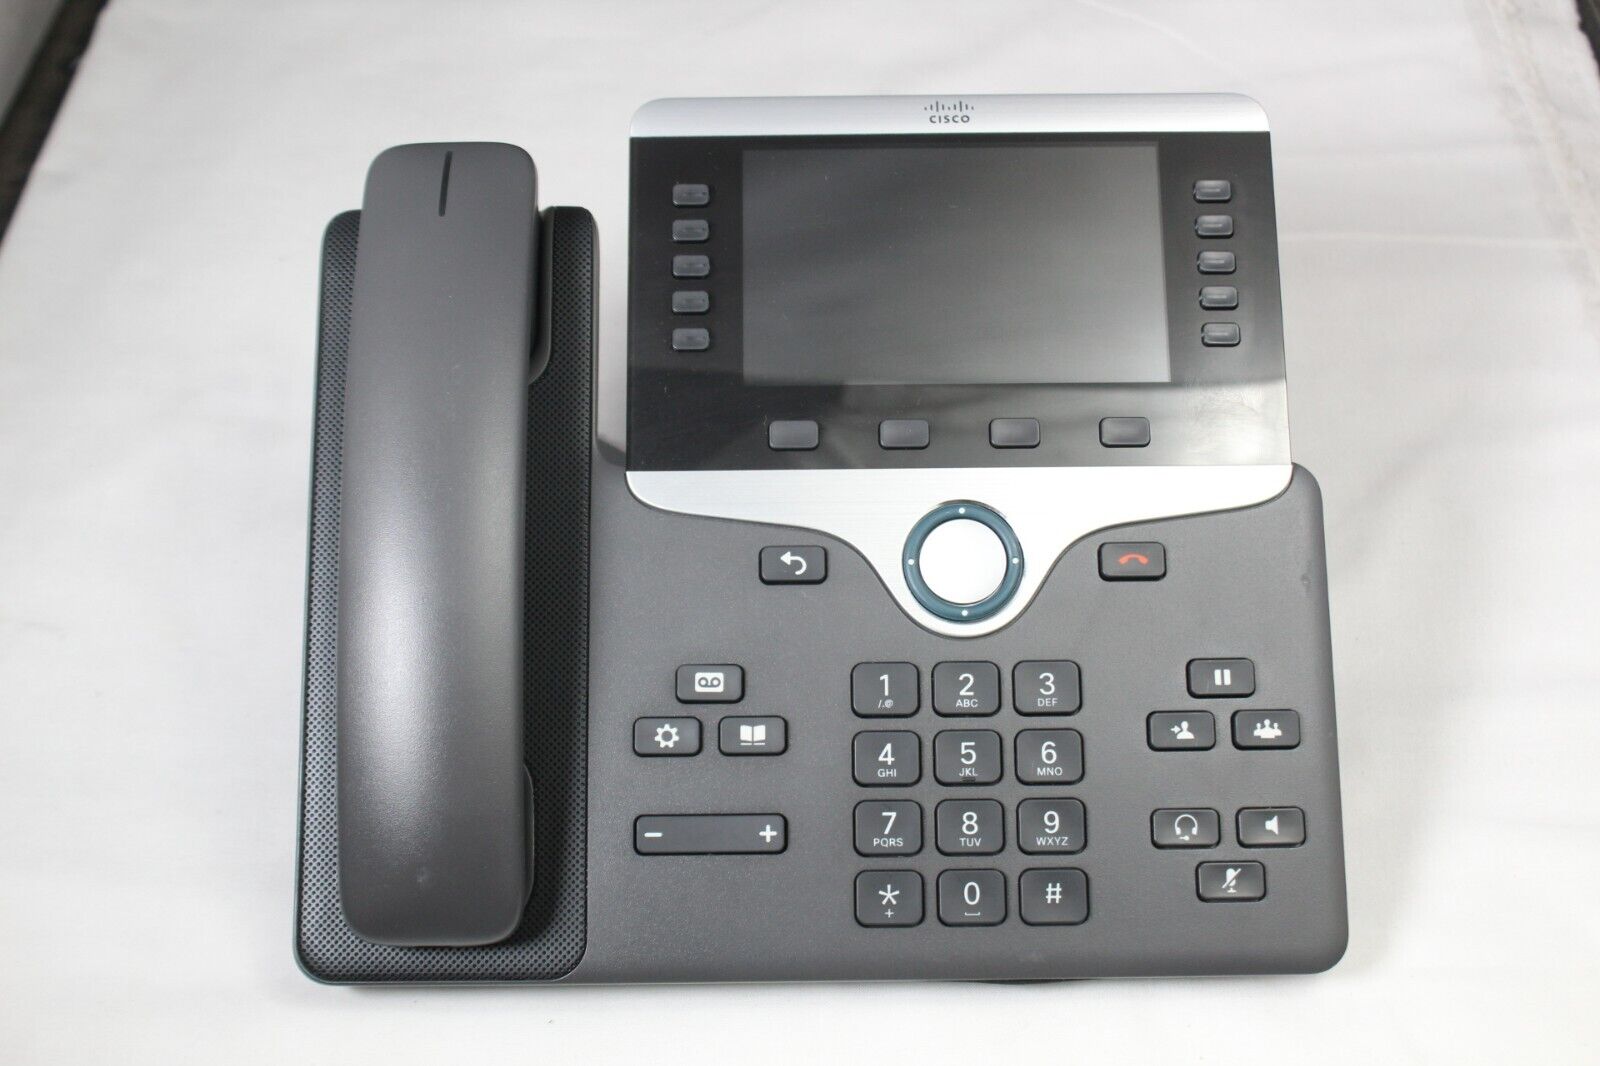 Lot of 10 Cisco CP-8811 Unified Office IP Phones (CP-8811-K9)